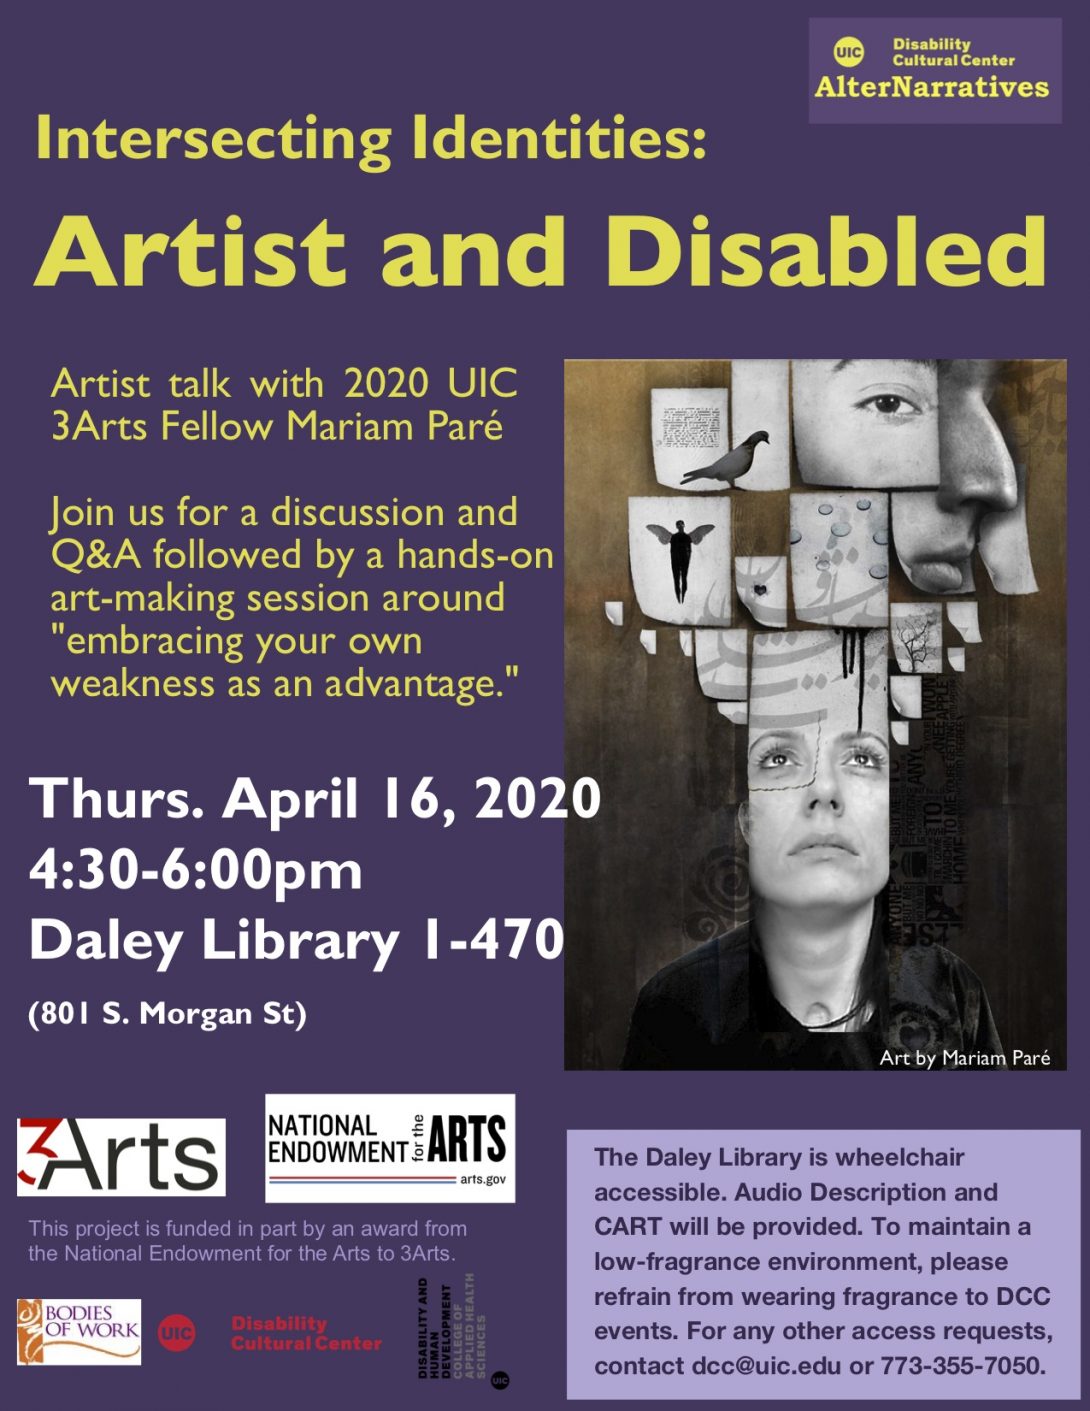 Intersecting Identities Flyer, purple with art by Paré, a self-portrait of the artist looking up at a cloud of images that are coming out of her head.